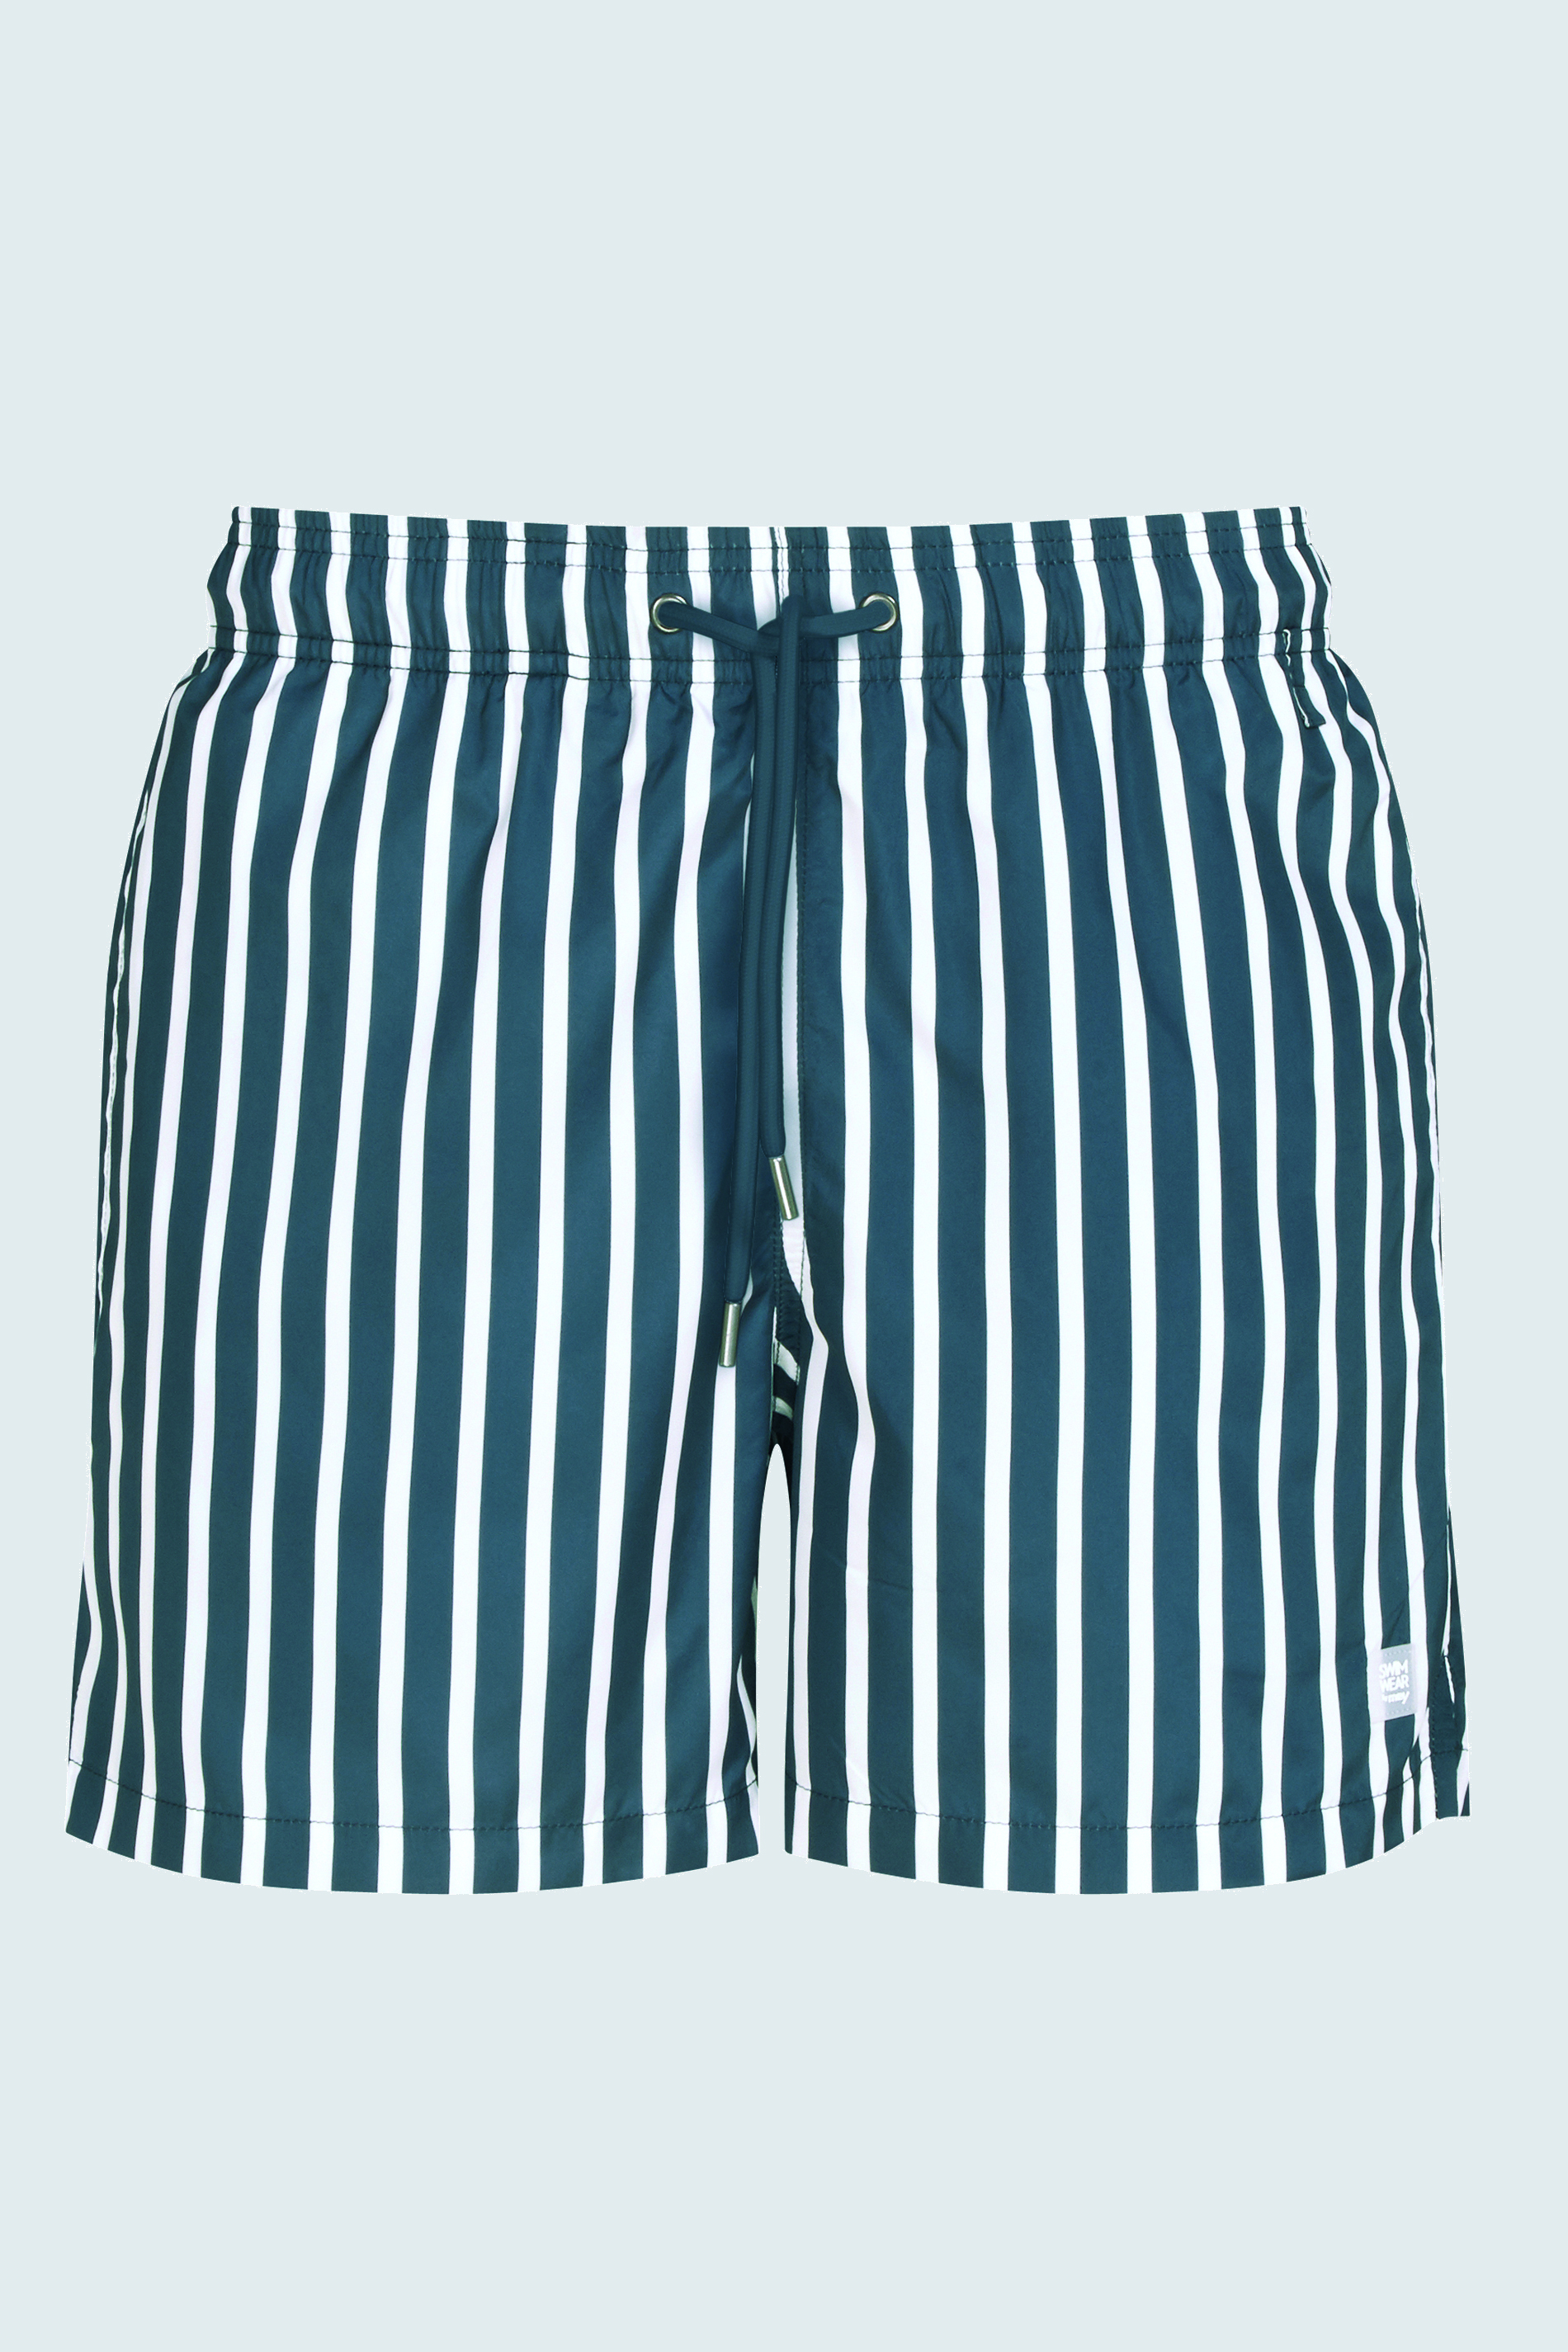 Zwemshorts Yacht Blue Serie Marco Stripes  Uitknippen | mey®